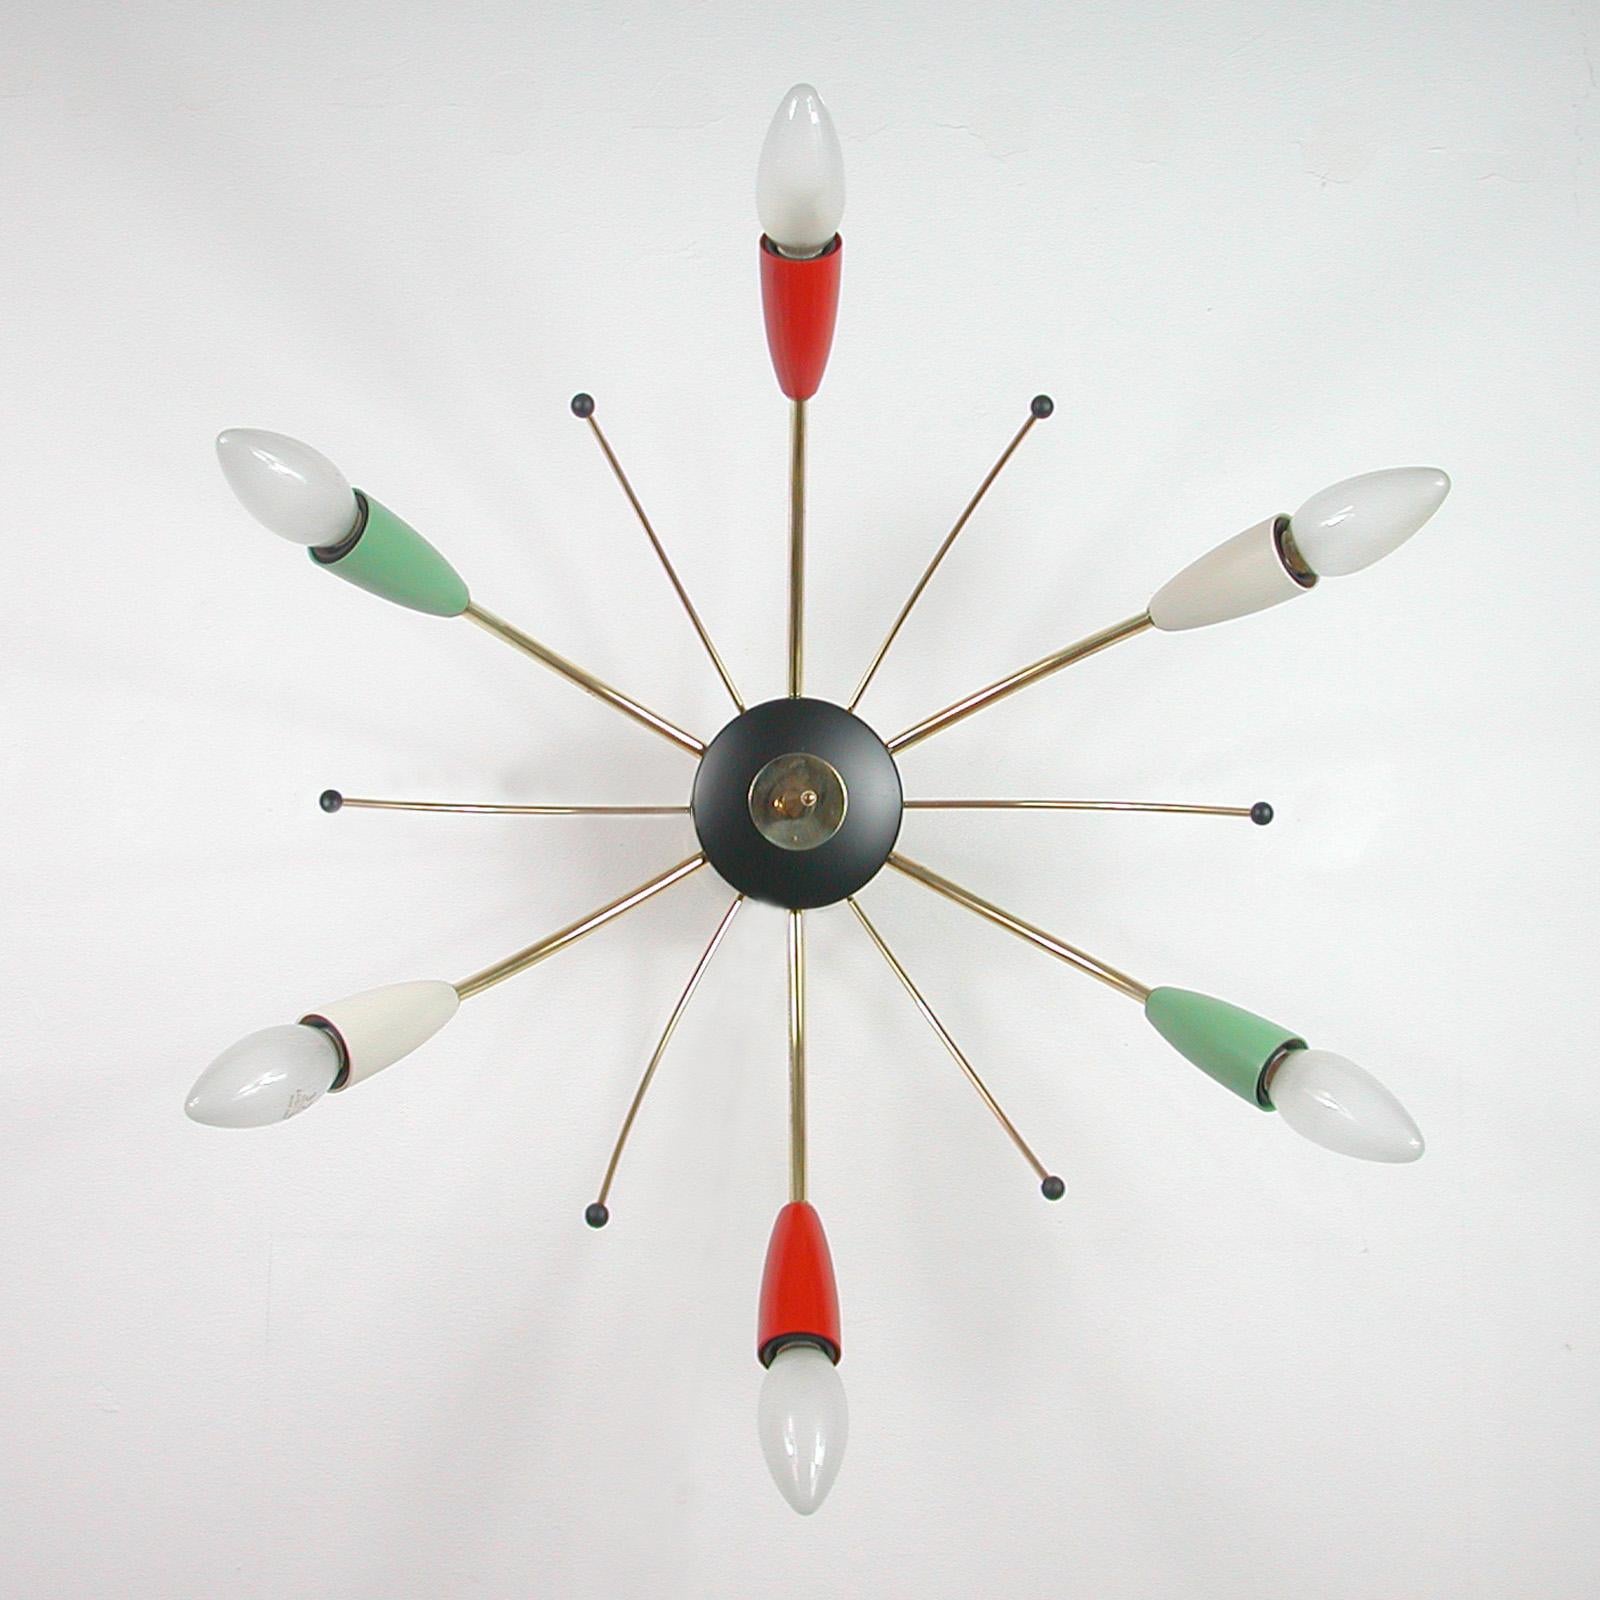 This Mid-Century Modern Sputnik light was designed and manufactured in Germany in the 1950s. It is made of brass and black lacquered metal with different colored (pale green, red and cream) plastic bulb holders and has got six lights.

Each bulb